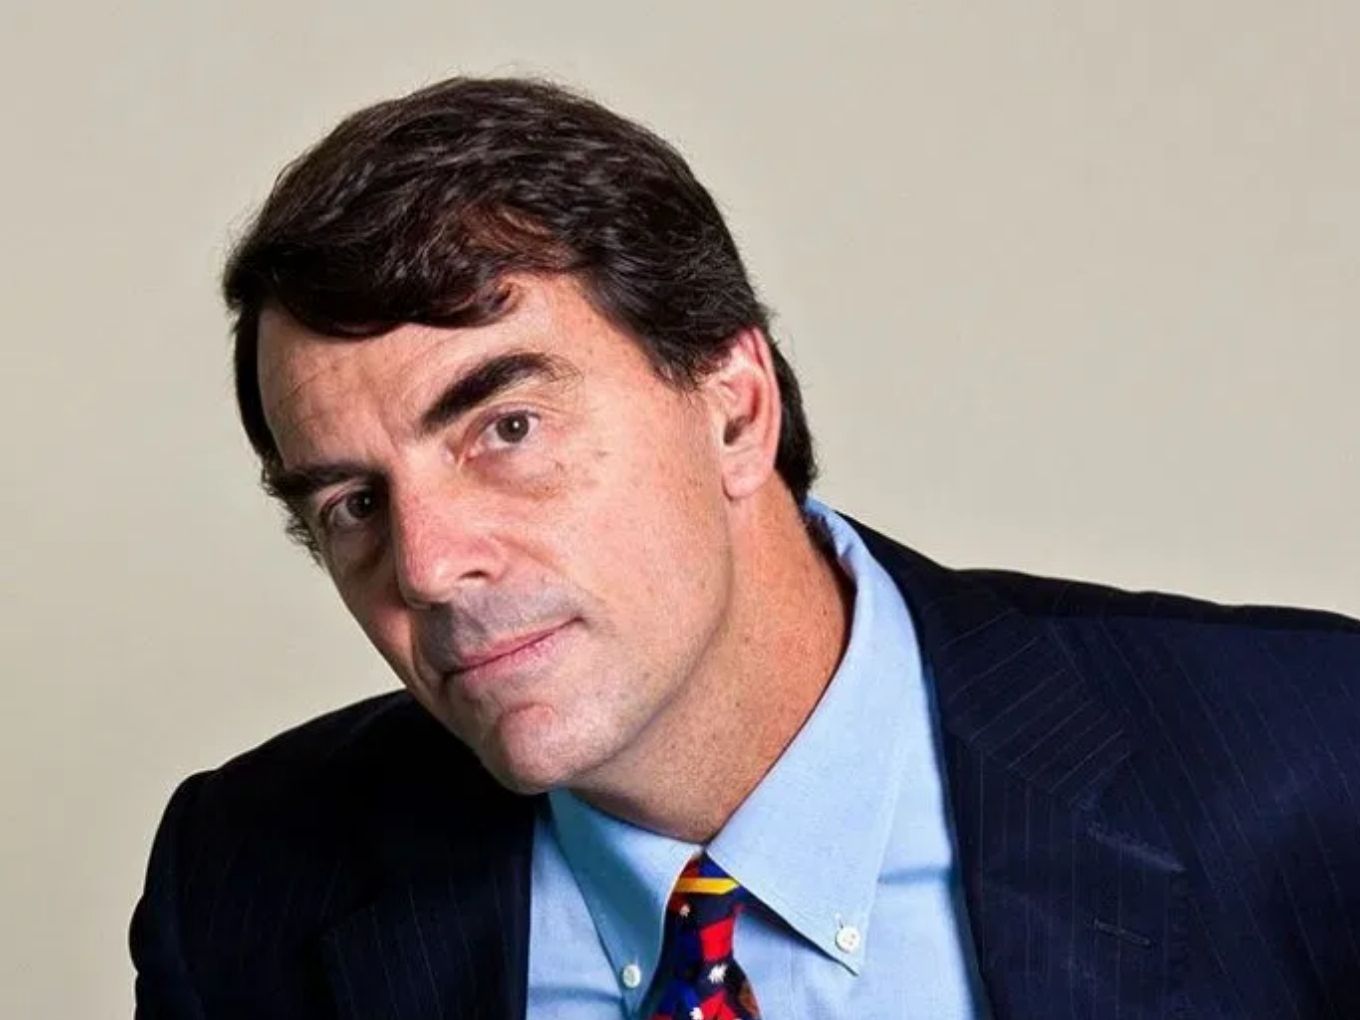 Tim Draper Wary Of India Investments Over Controversial Citizens Acts